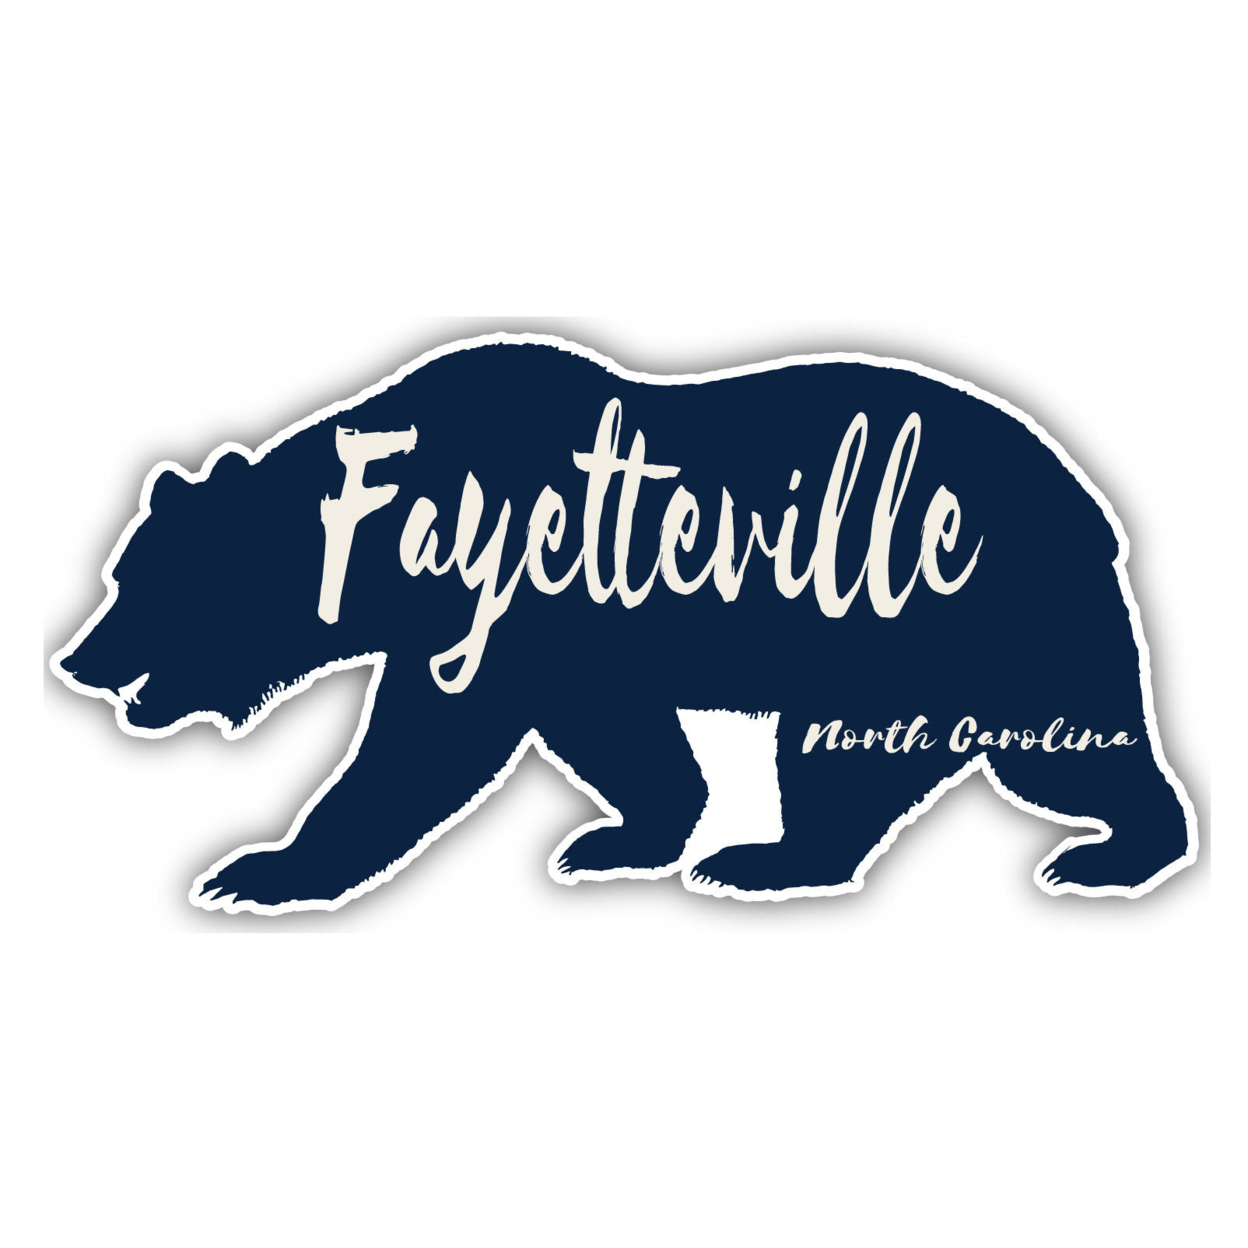 Fayetteville North Carolina Souvenir Decorative Stickers (Choose Theme And Size) - 4-Pack, 2-Inch, Camp Life